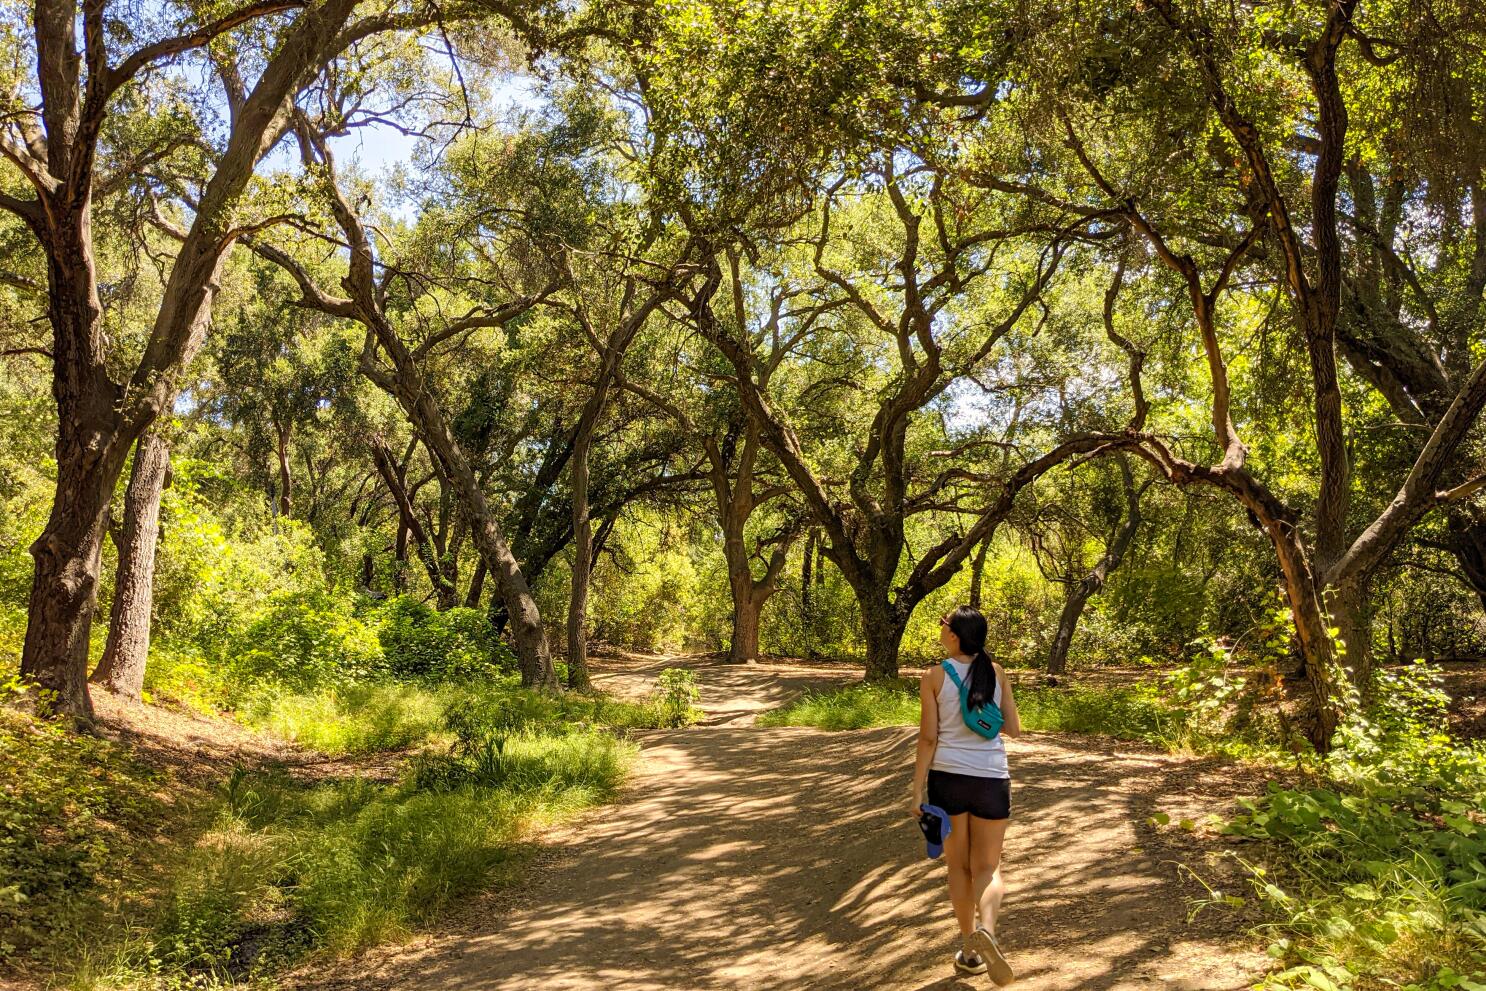 The Best Summer Hiking Trails in California